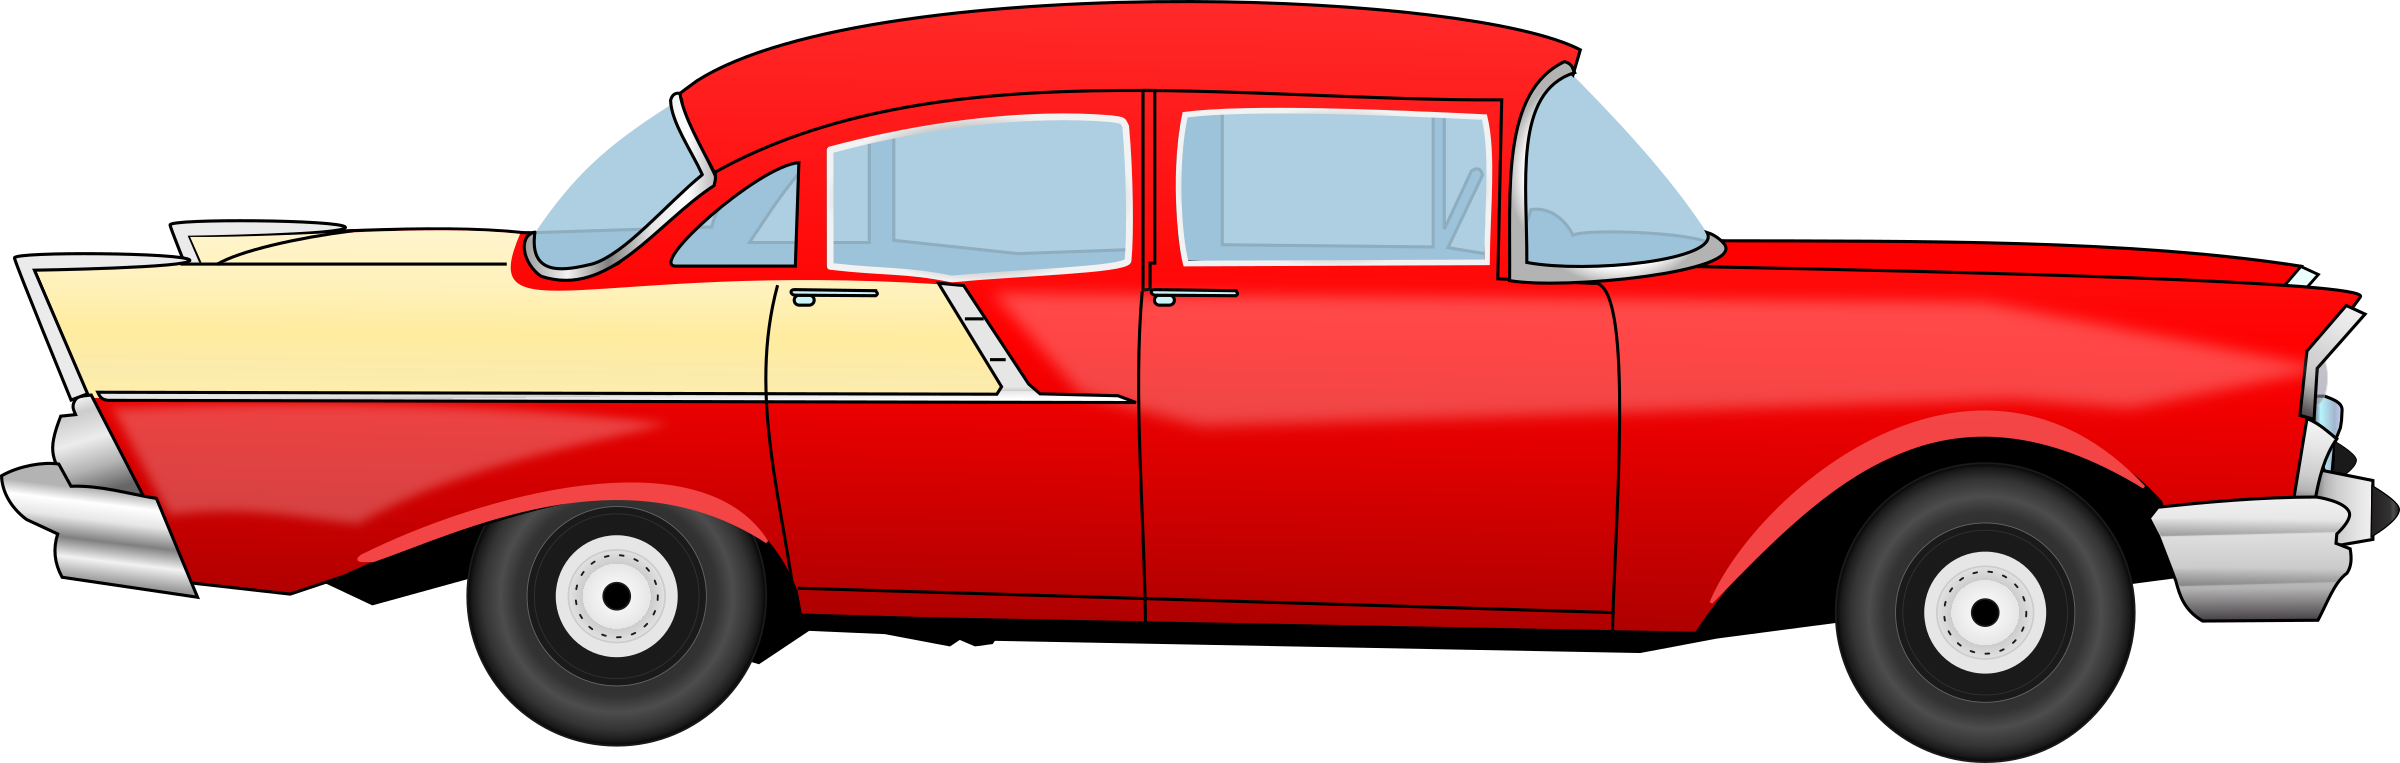 Chevrolet 55 Old Classic Car Jpg Free Download - Old Fashioned Car Clipart, Hd Png Download